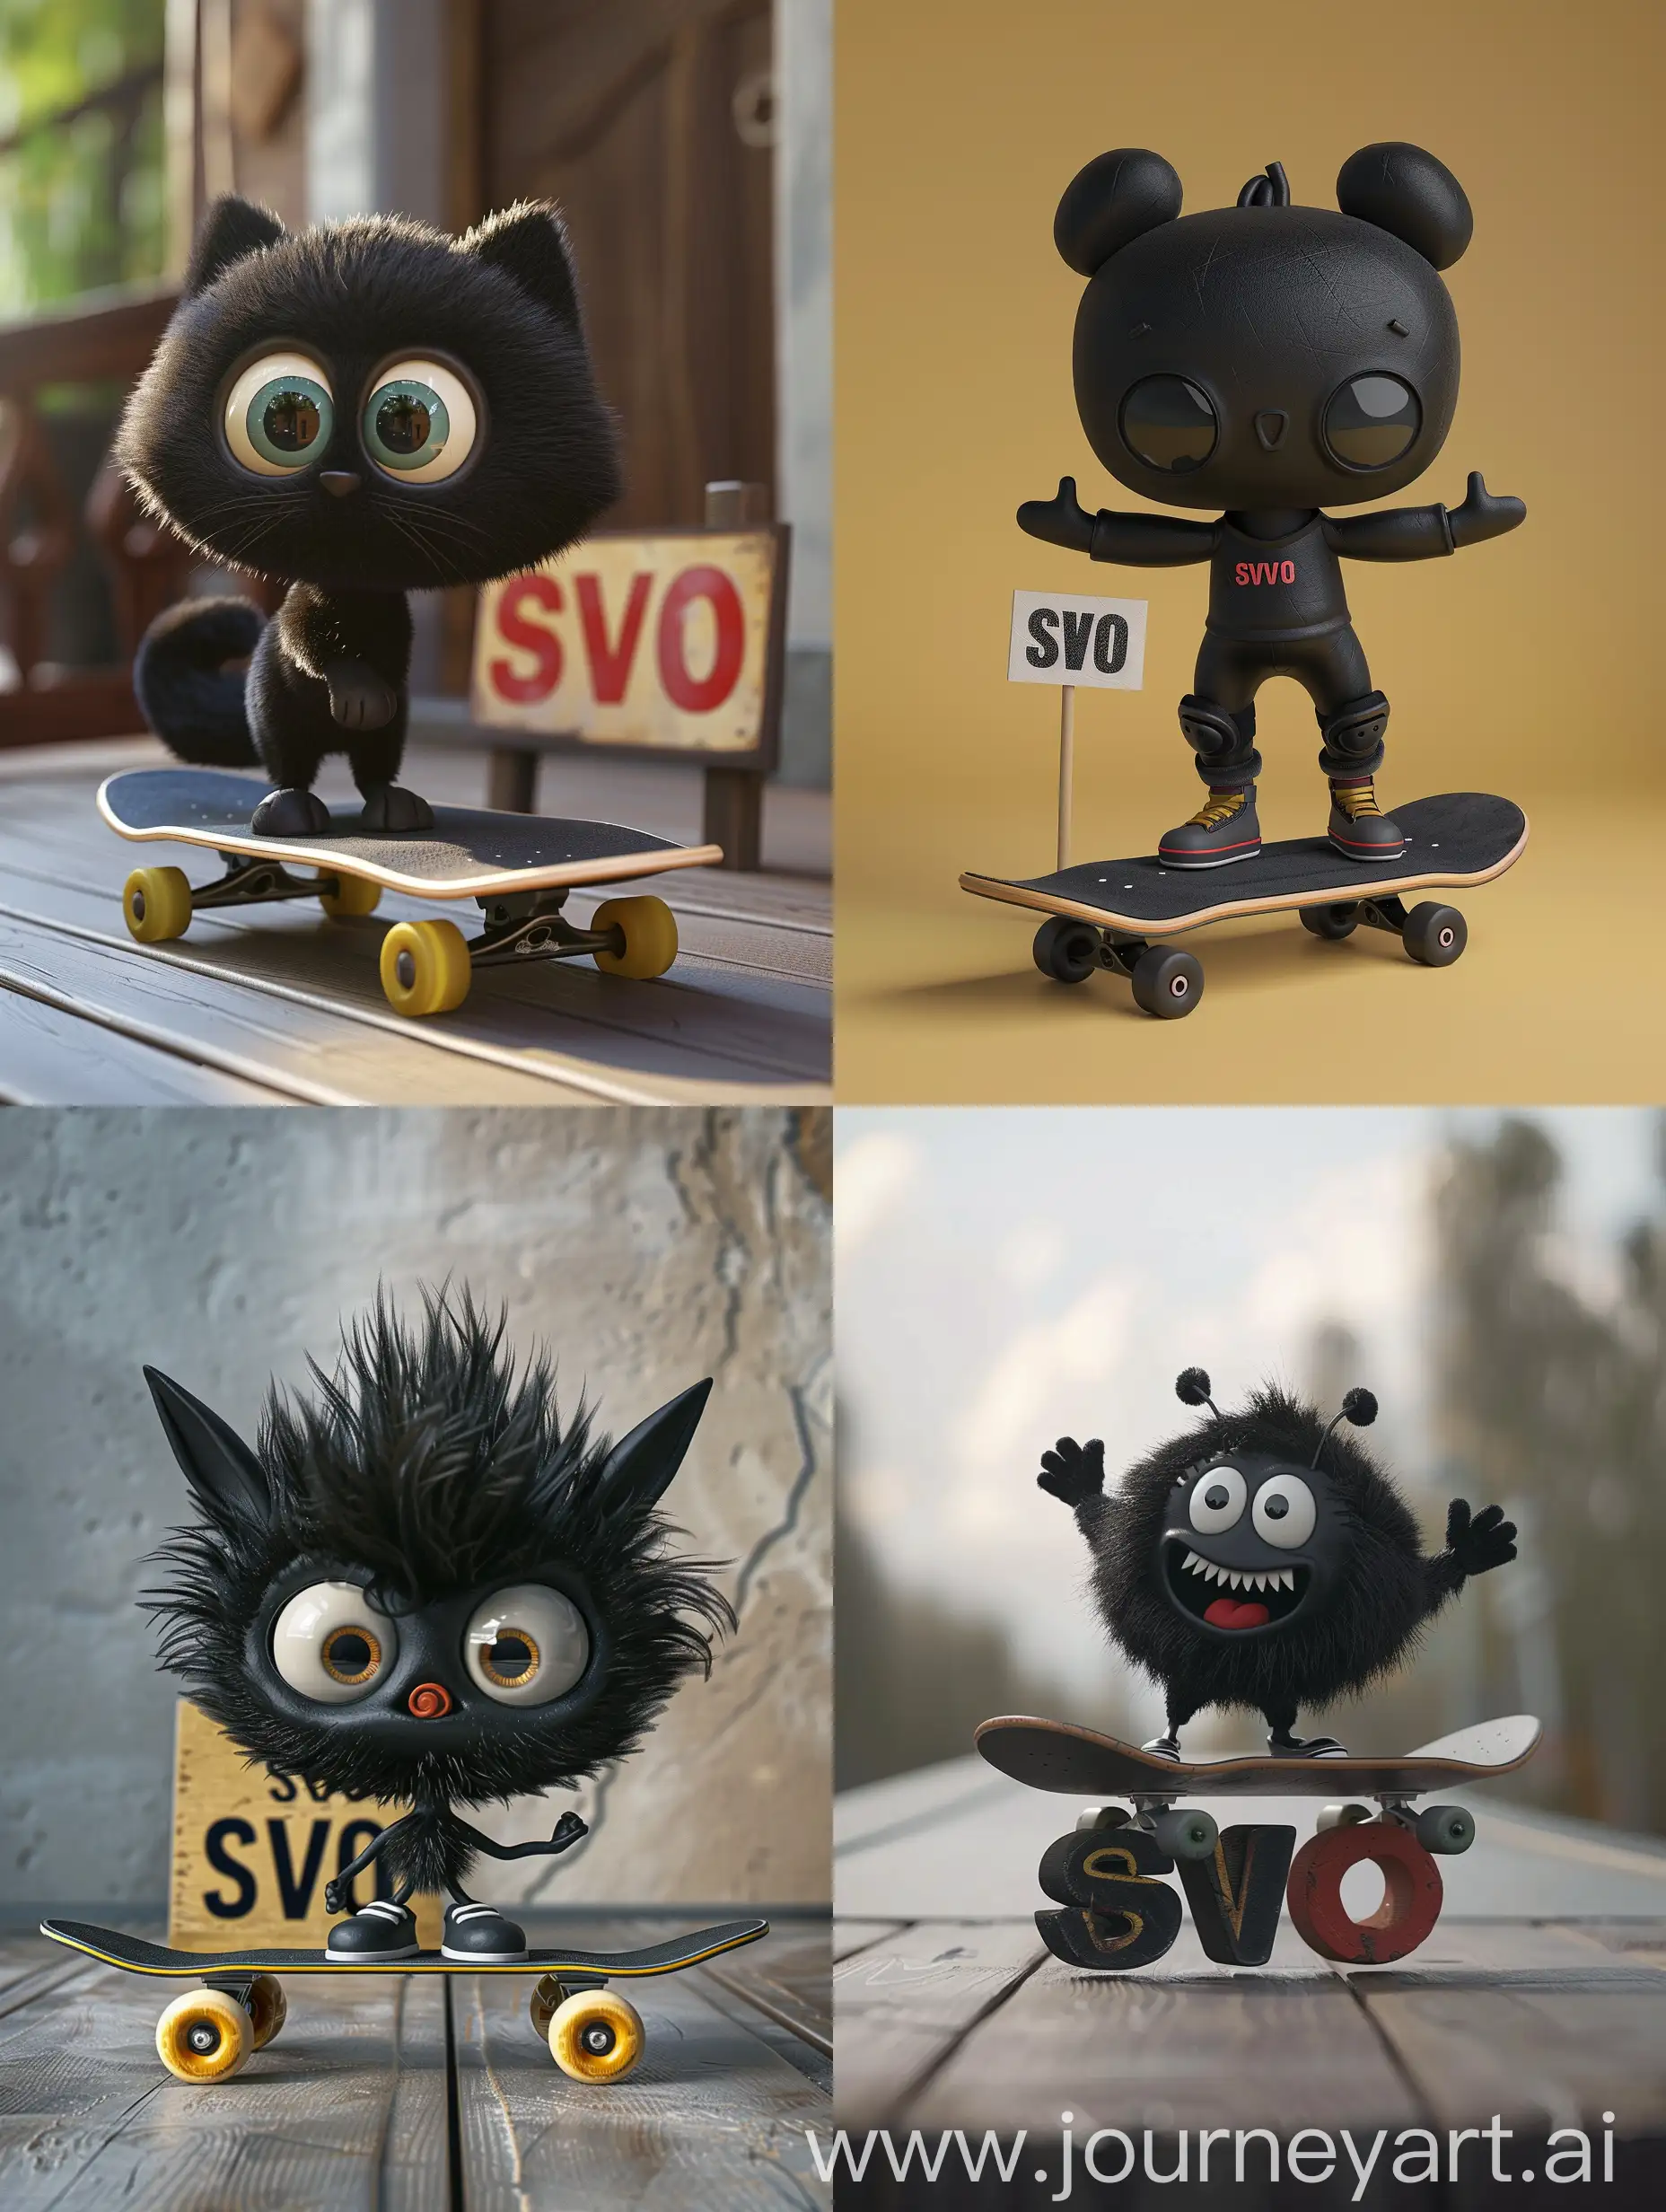 Black-Luntik-Skateboarding-with-SVO-Sign-in-3D-Cartoon-Style